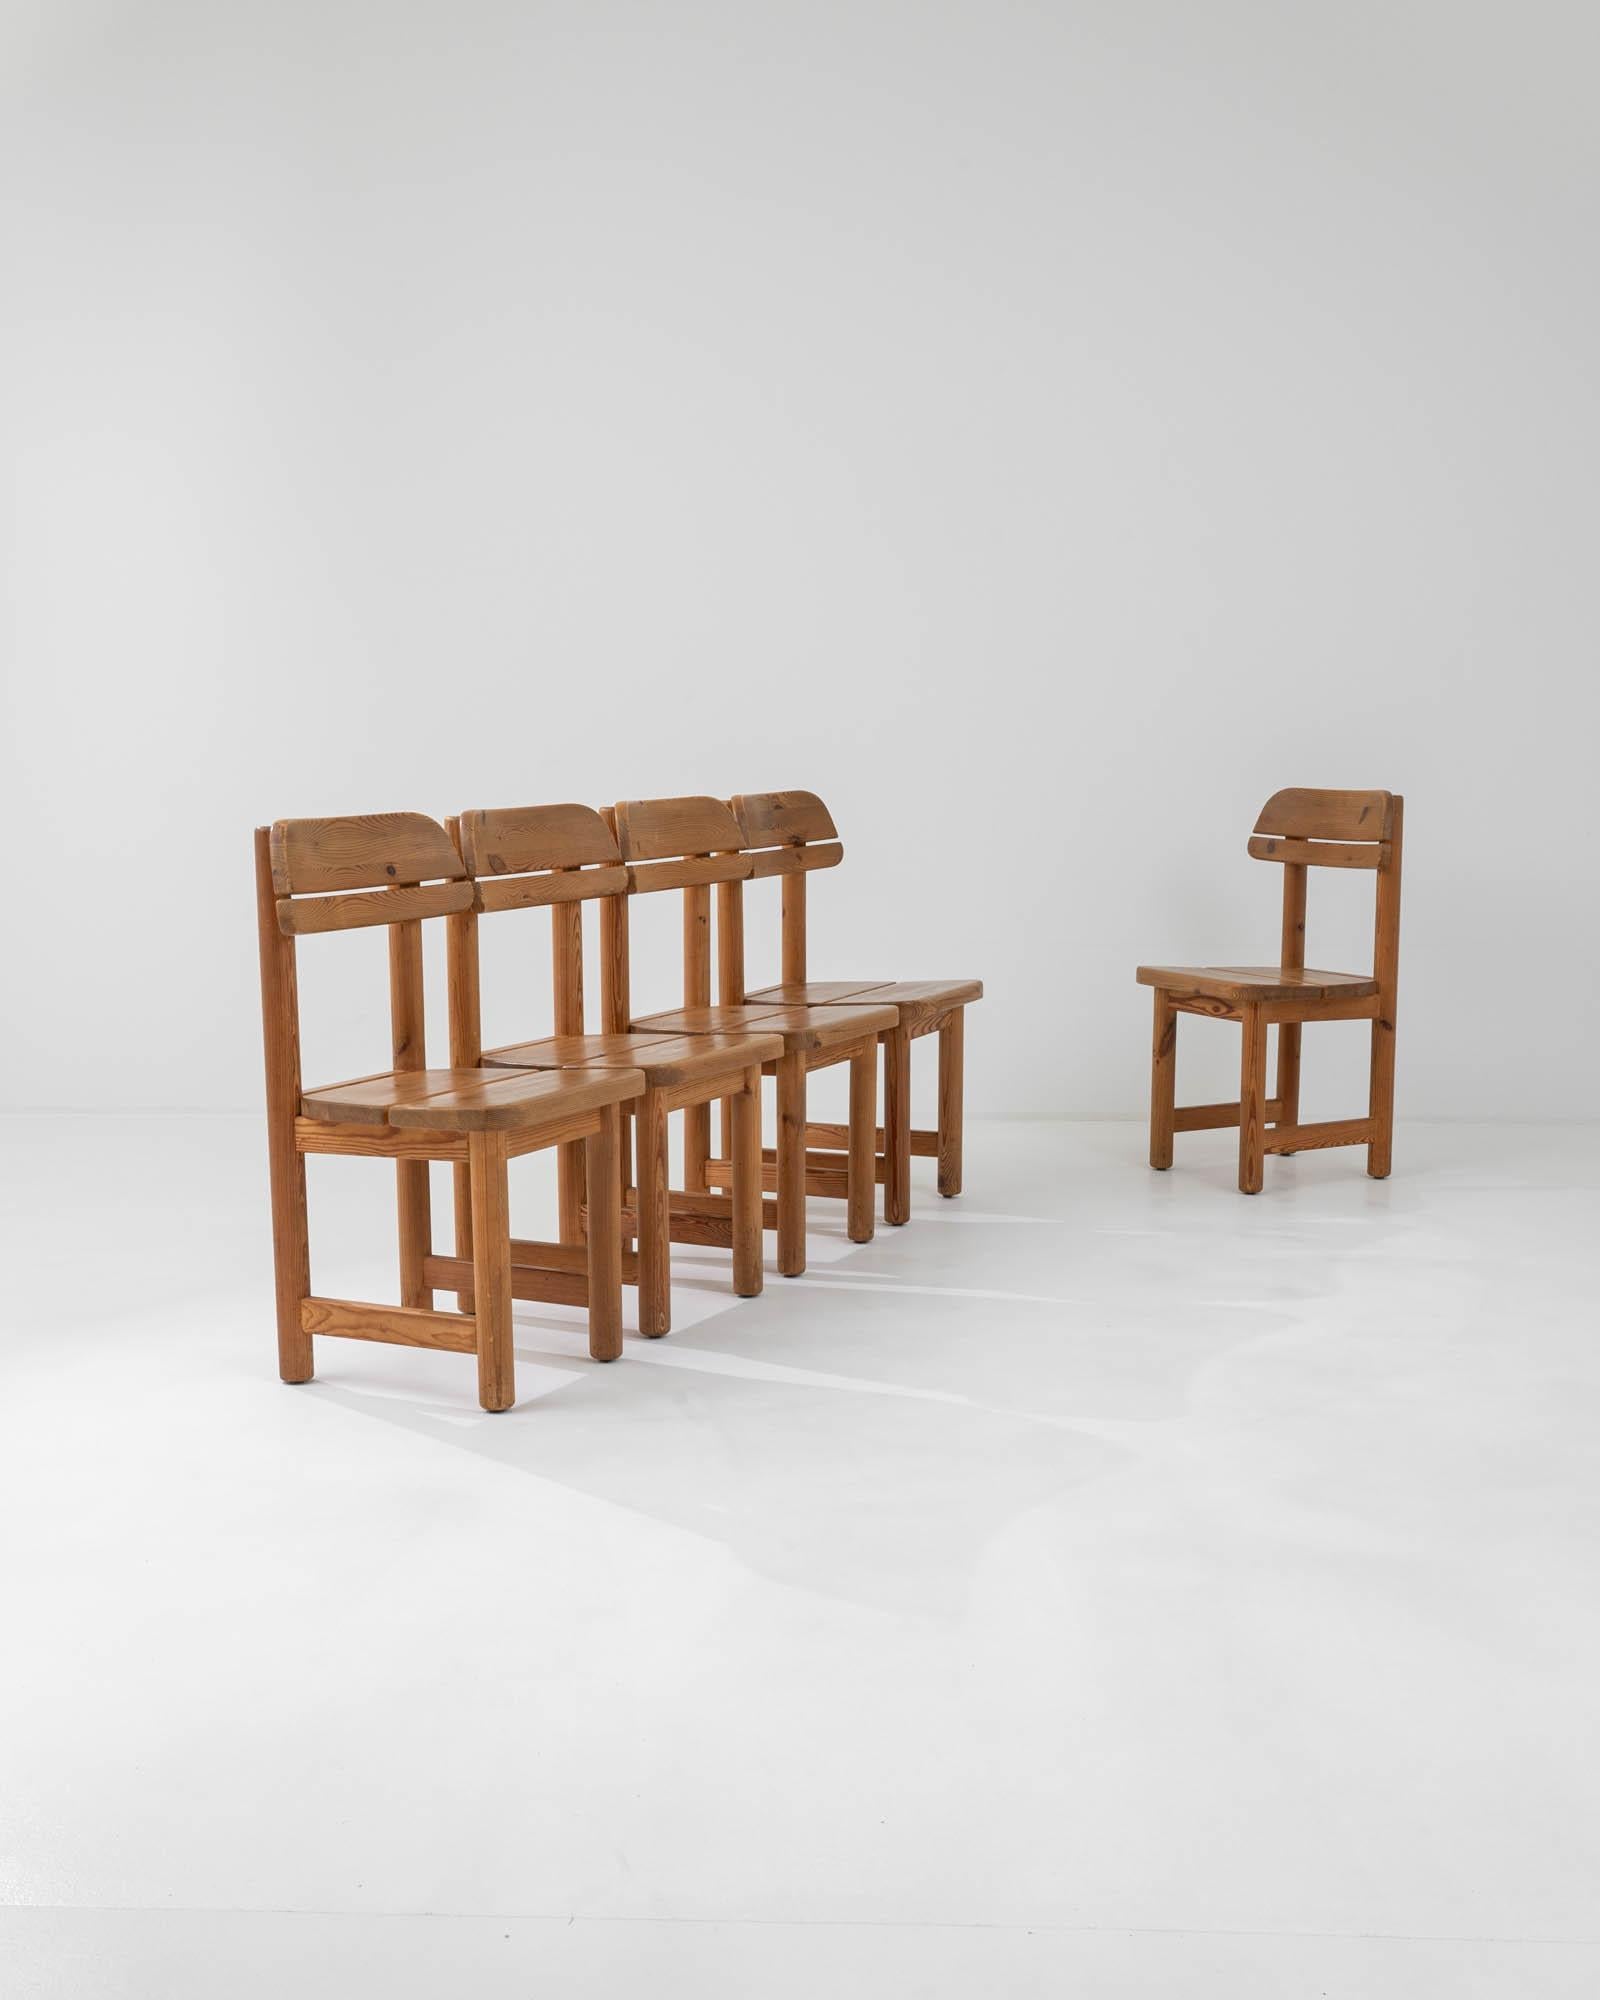 This homespun set of chairs comes in an eclectic styling that resembles minimalism, country, and modernism– nodding to the iconic style of Rainer Daumiller. Yet they hold an organic and no-frills beauty, with modern-inspired curves and simple